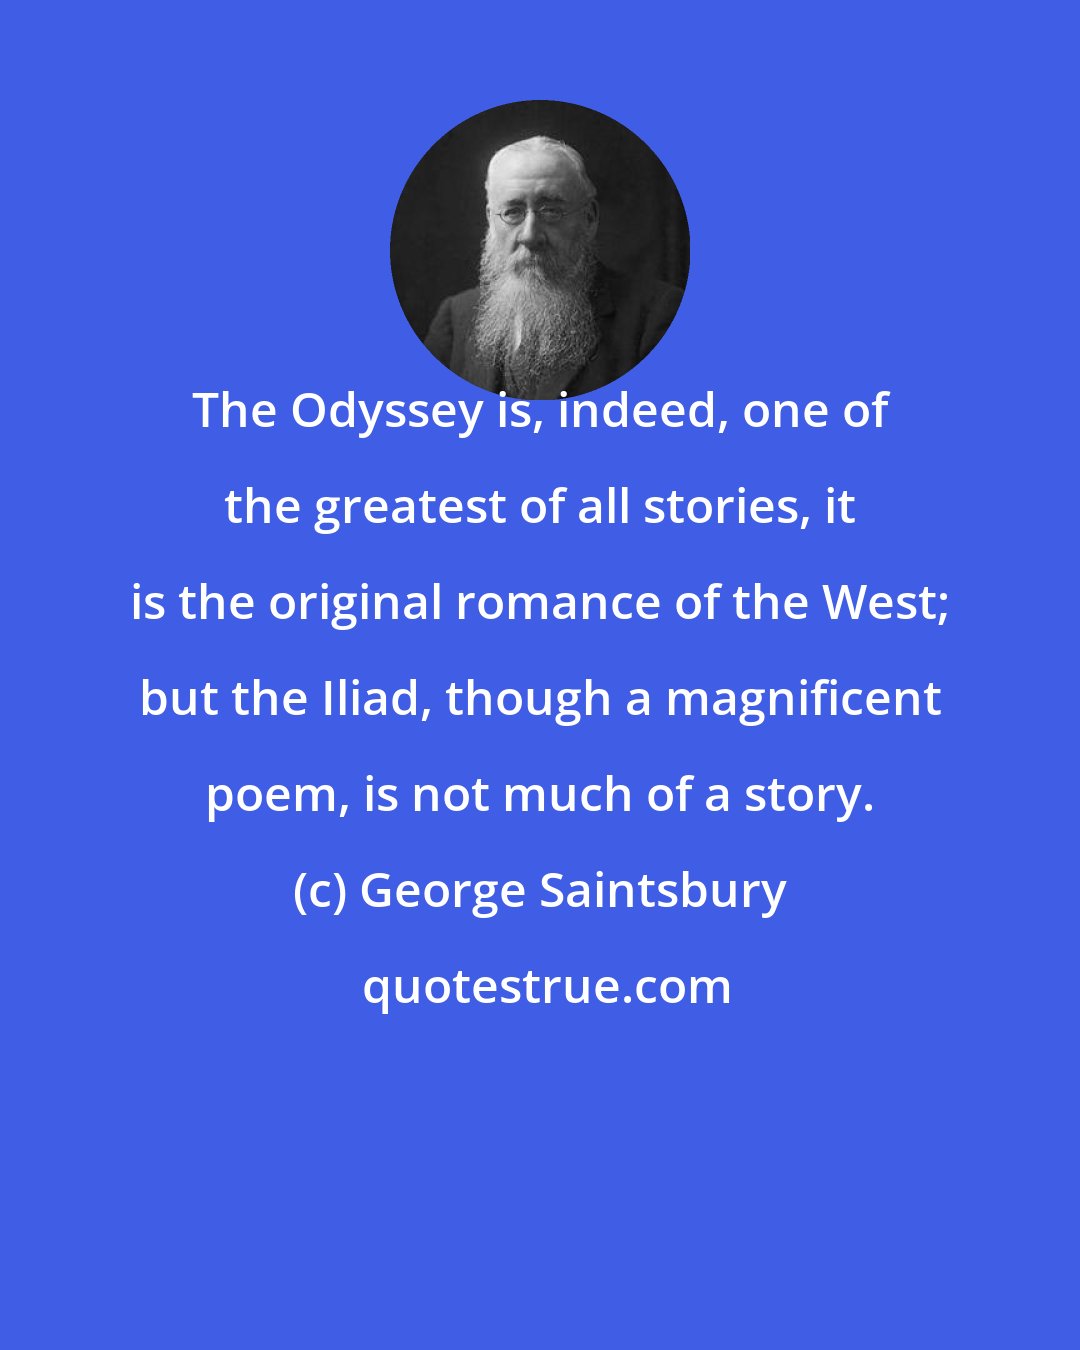 George Saintsbury: The Odyssey is, indeed, one of the greatest of all stories, it is the original romance of the West; but the Iliad, though a magnificent poem, is not much of a story.